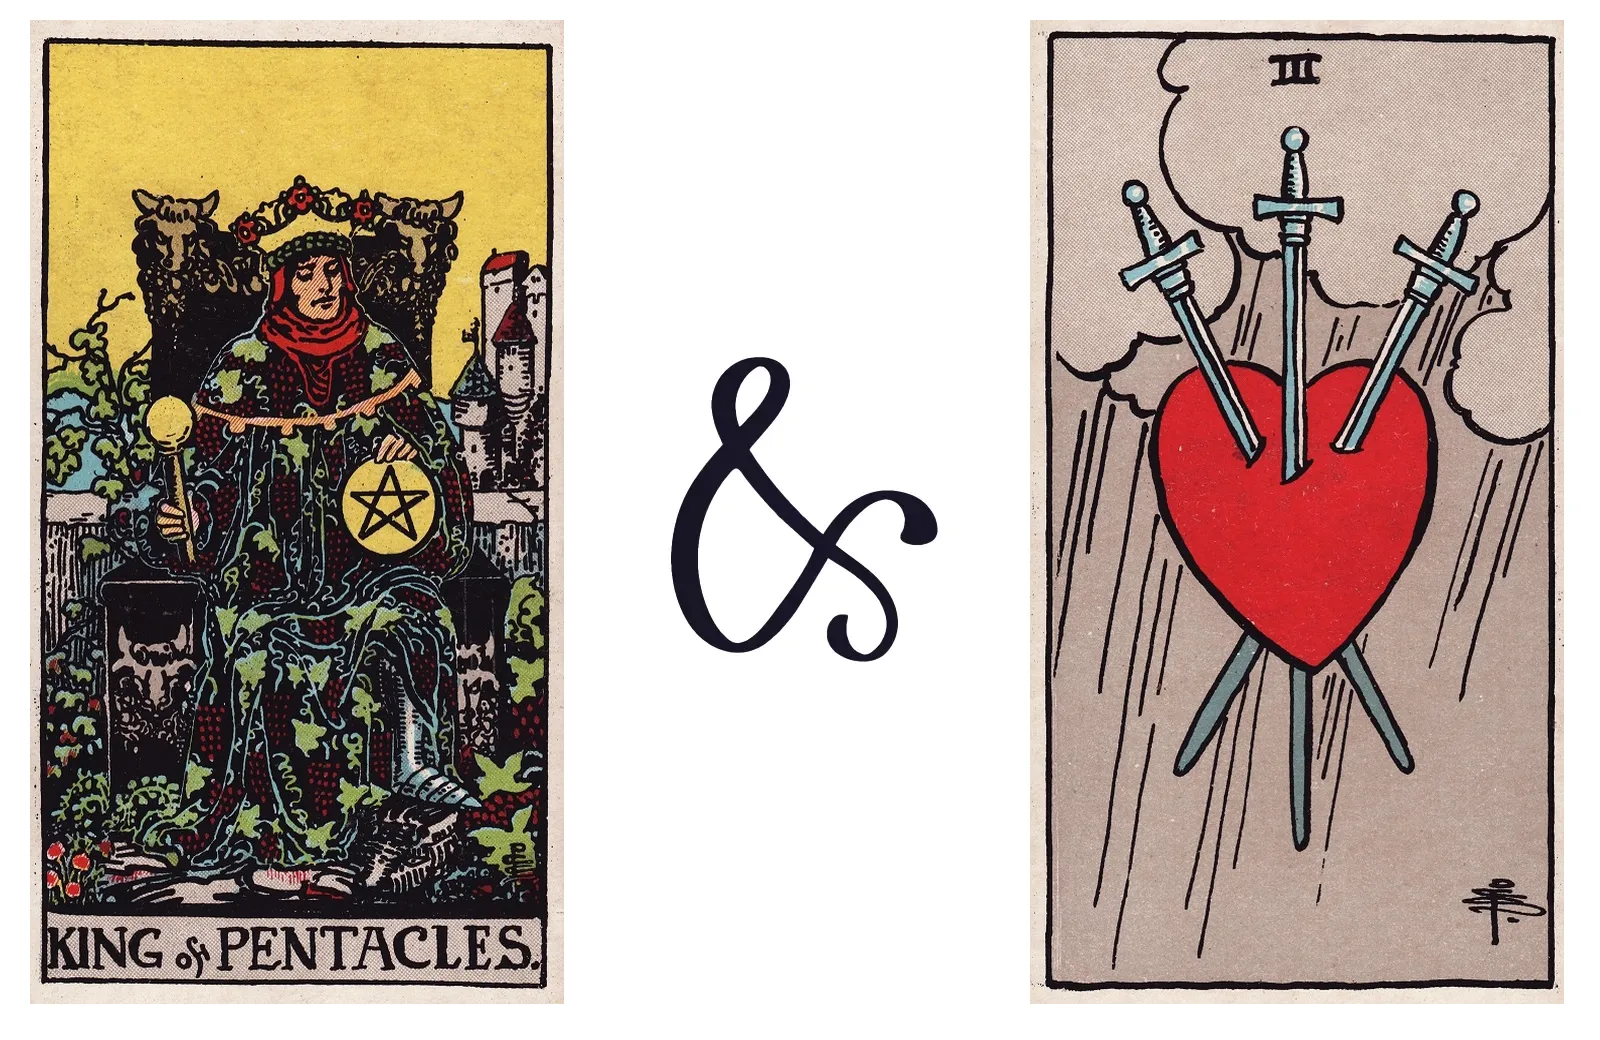 King of Pentacles and Three of Swords